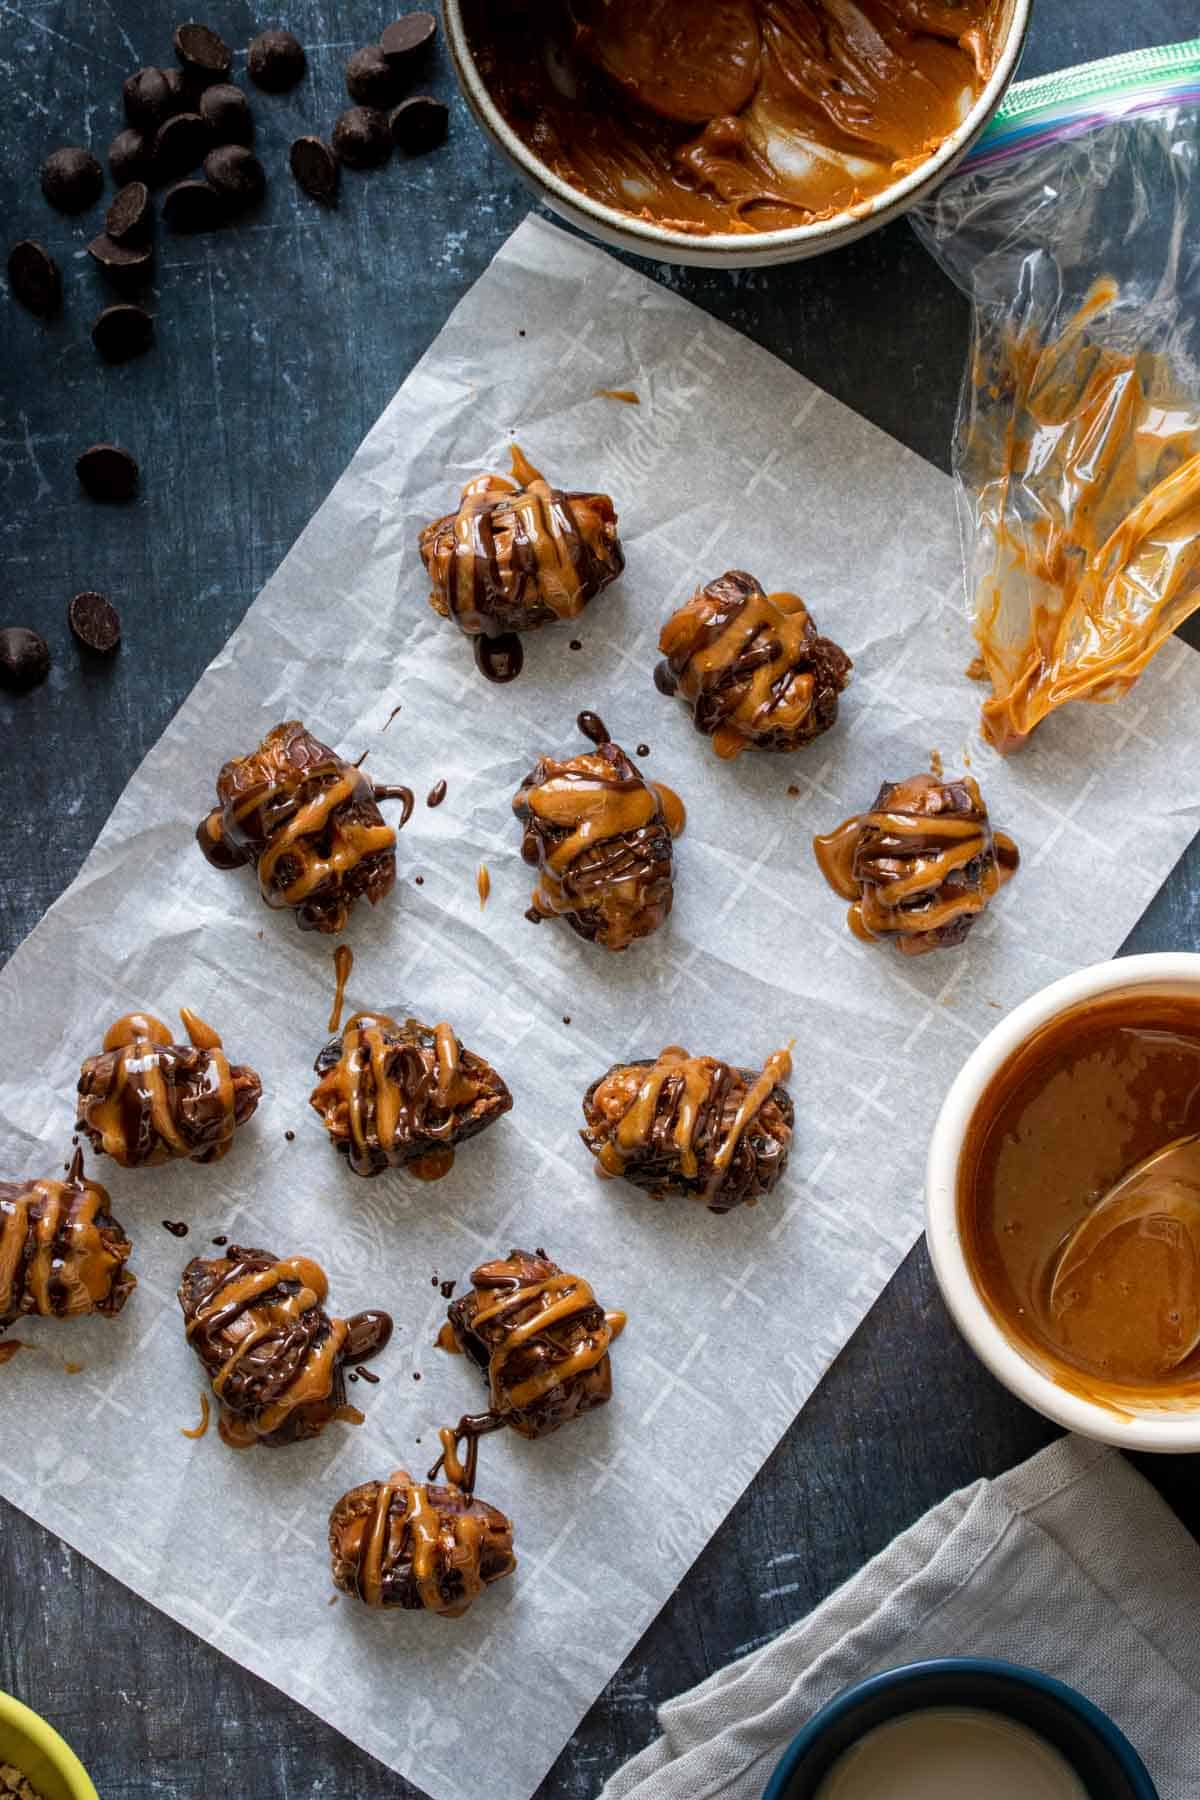 A group of dates on a piece of parchment paper drizzled with chocolate and caramel next to bowls of those